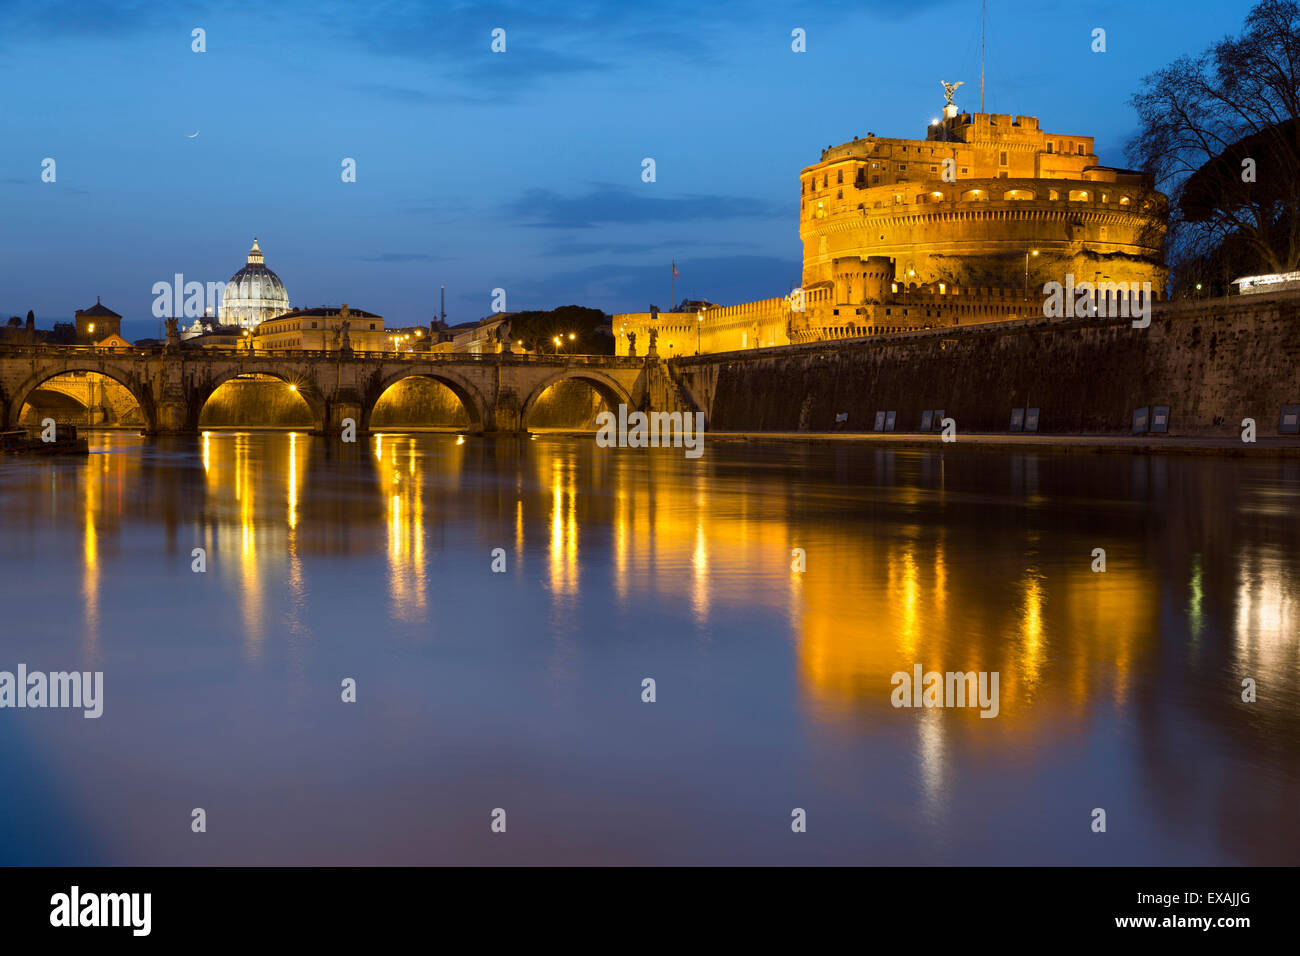 Castel Sant'Angelo and St. Peter's Basilica from the River Tiber at night, Rome, Lazio, Italy, Europe Stock Photo